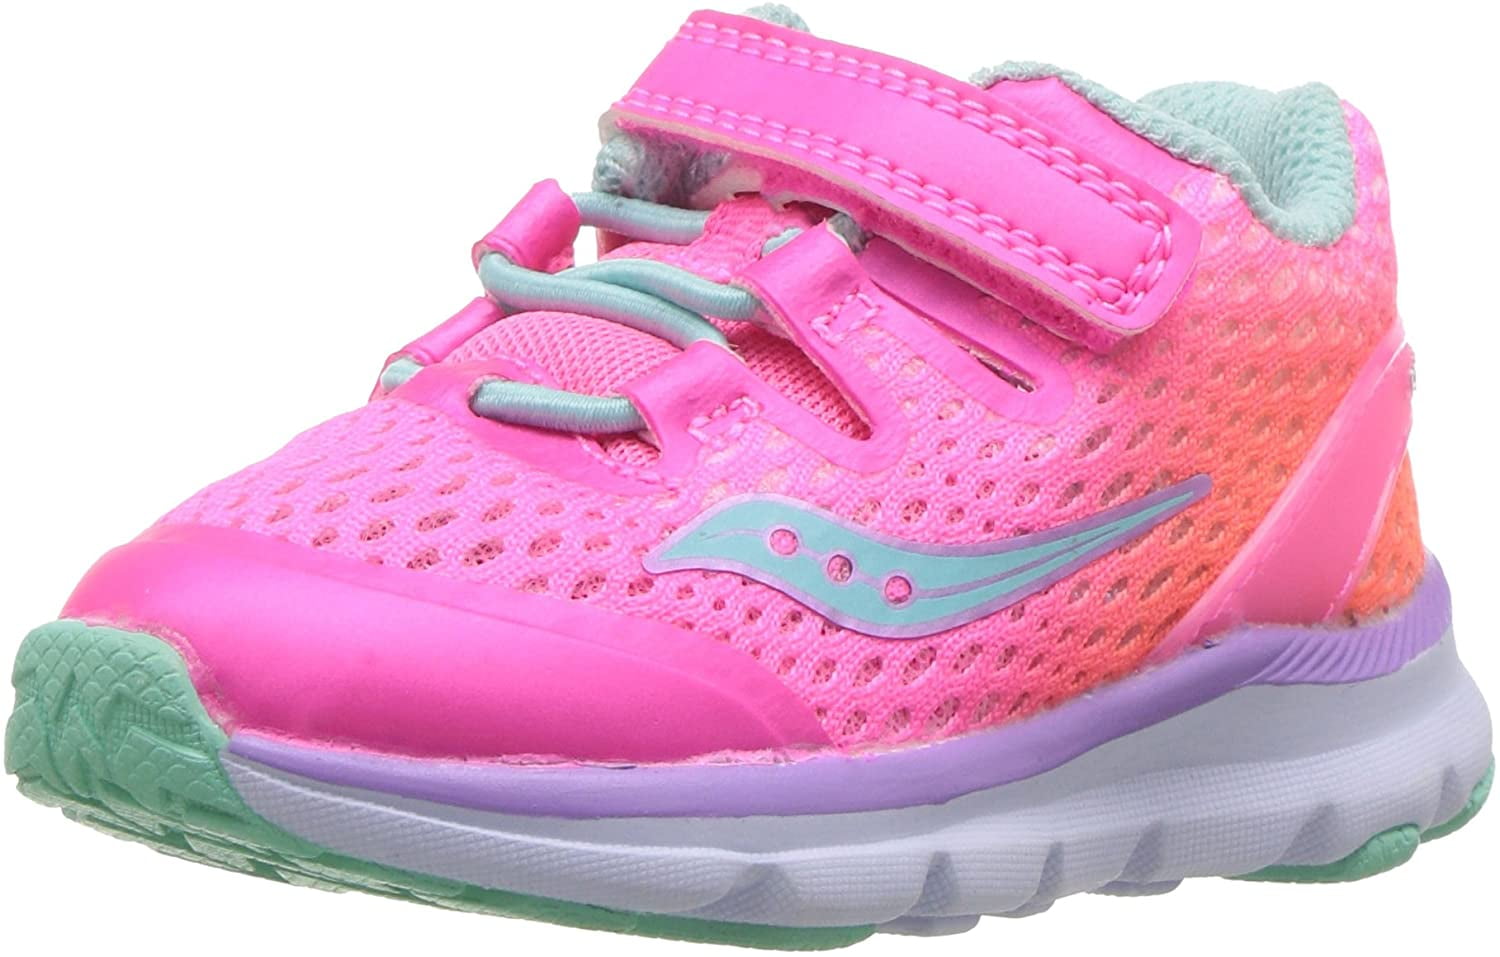 saucony toddler sneakers